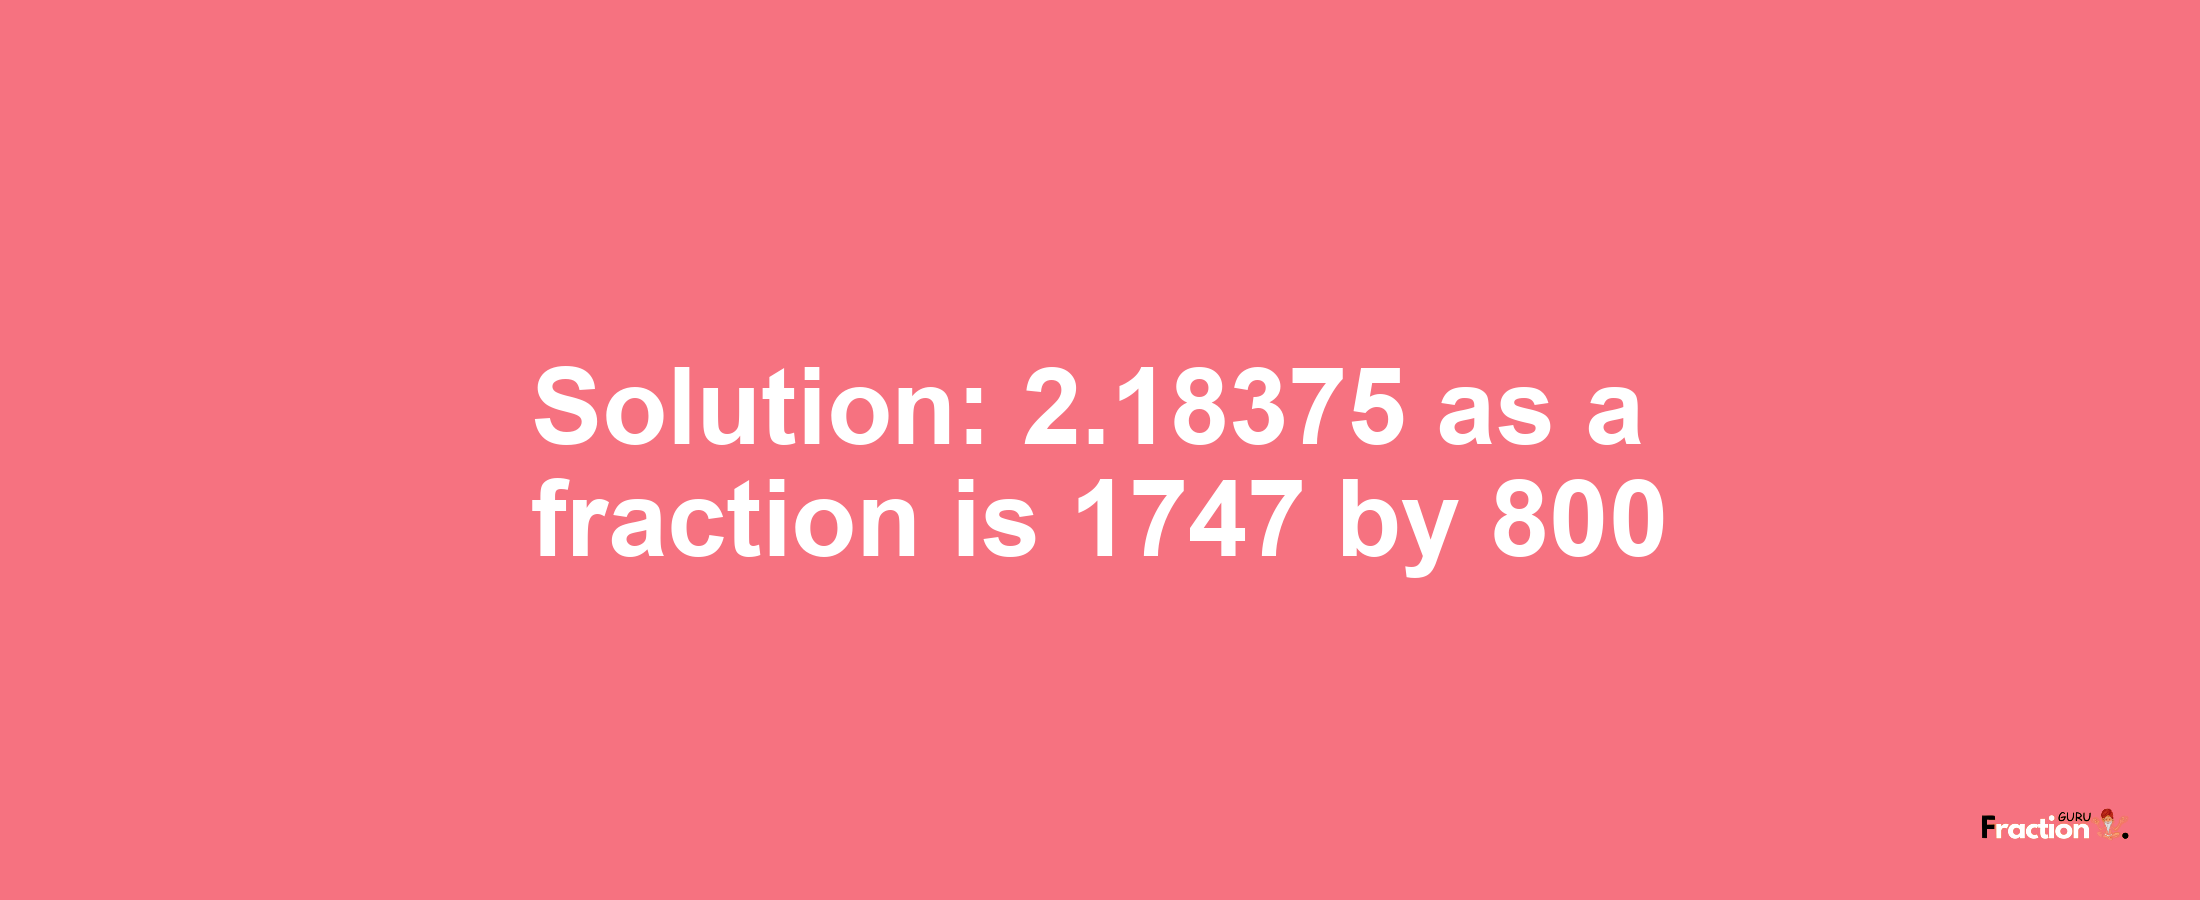 Solution:2.18375 as a fraction is 1747/800